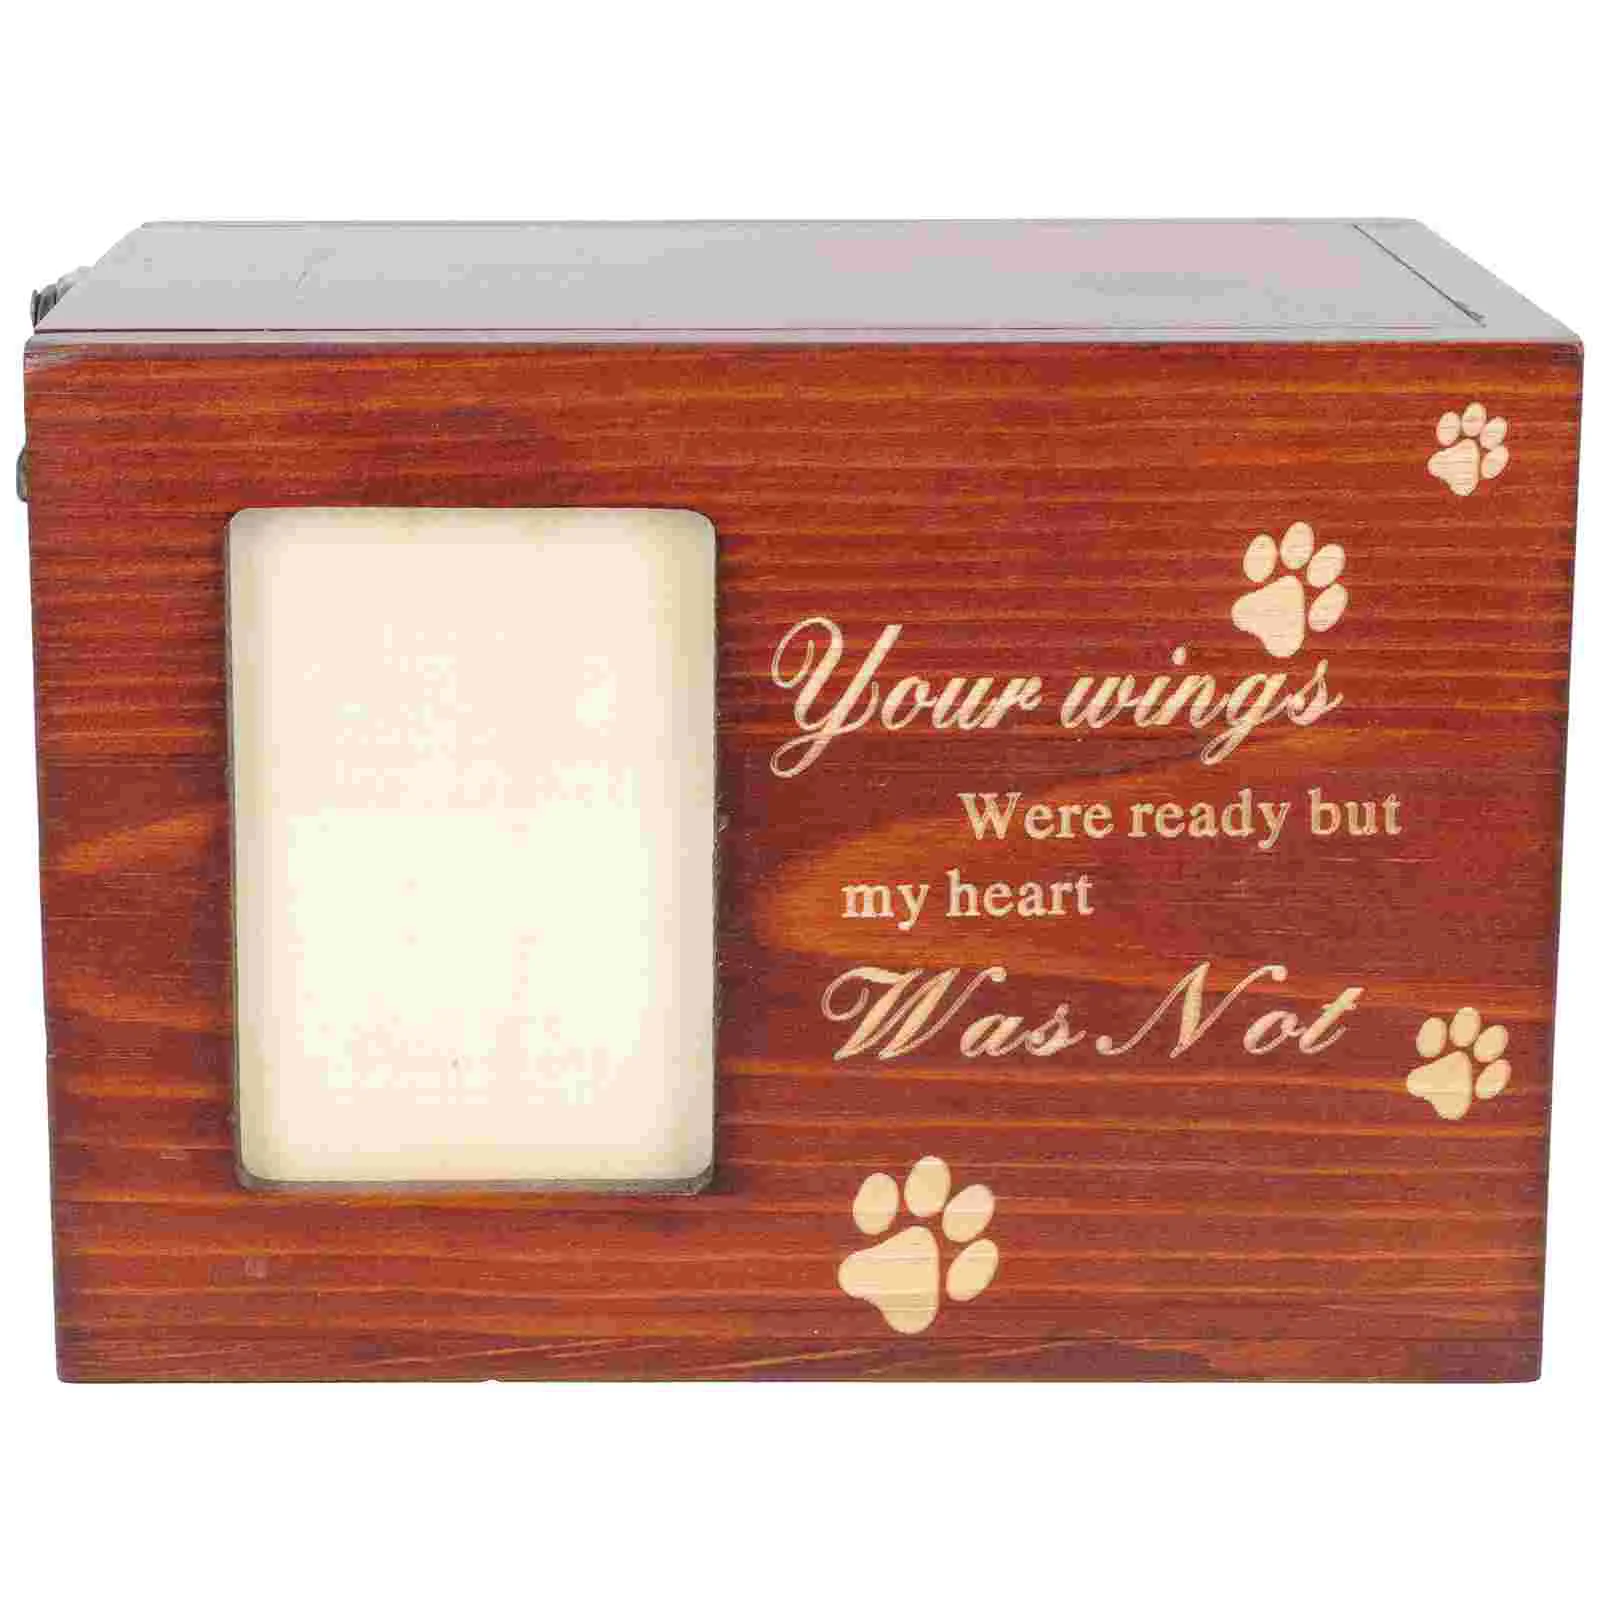 

Box Pet Ashes Urn Dog Memory Cremation For Urns Keepsake Photo Wooden Memorial Dogs Ash Cat Casket Small Bone Or Cats Gifts Paw